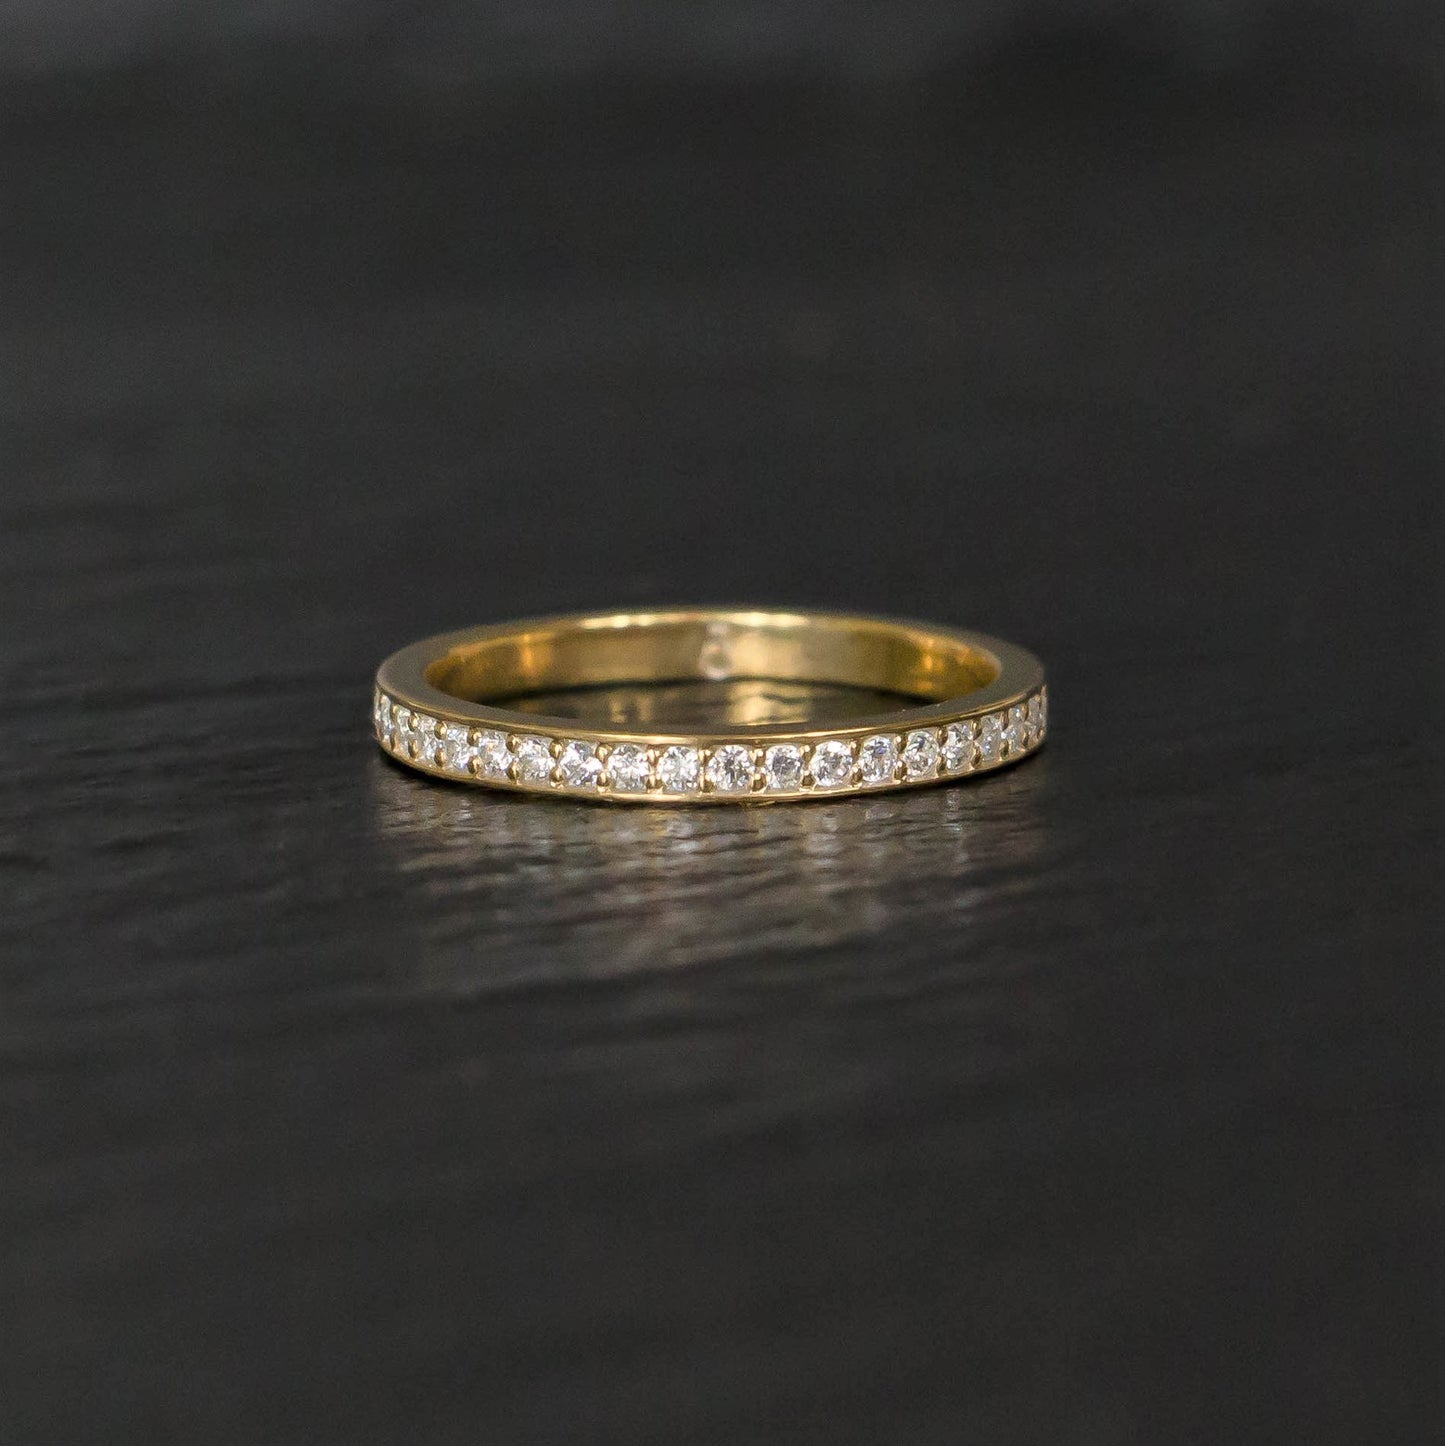 Bright cut wedding band in yellow gold and diamonds - stackable